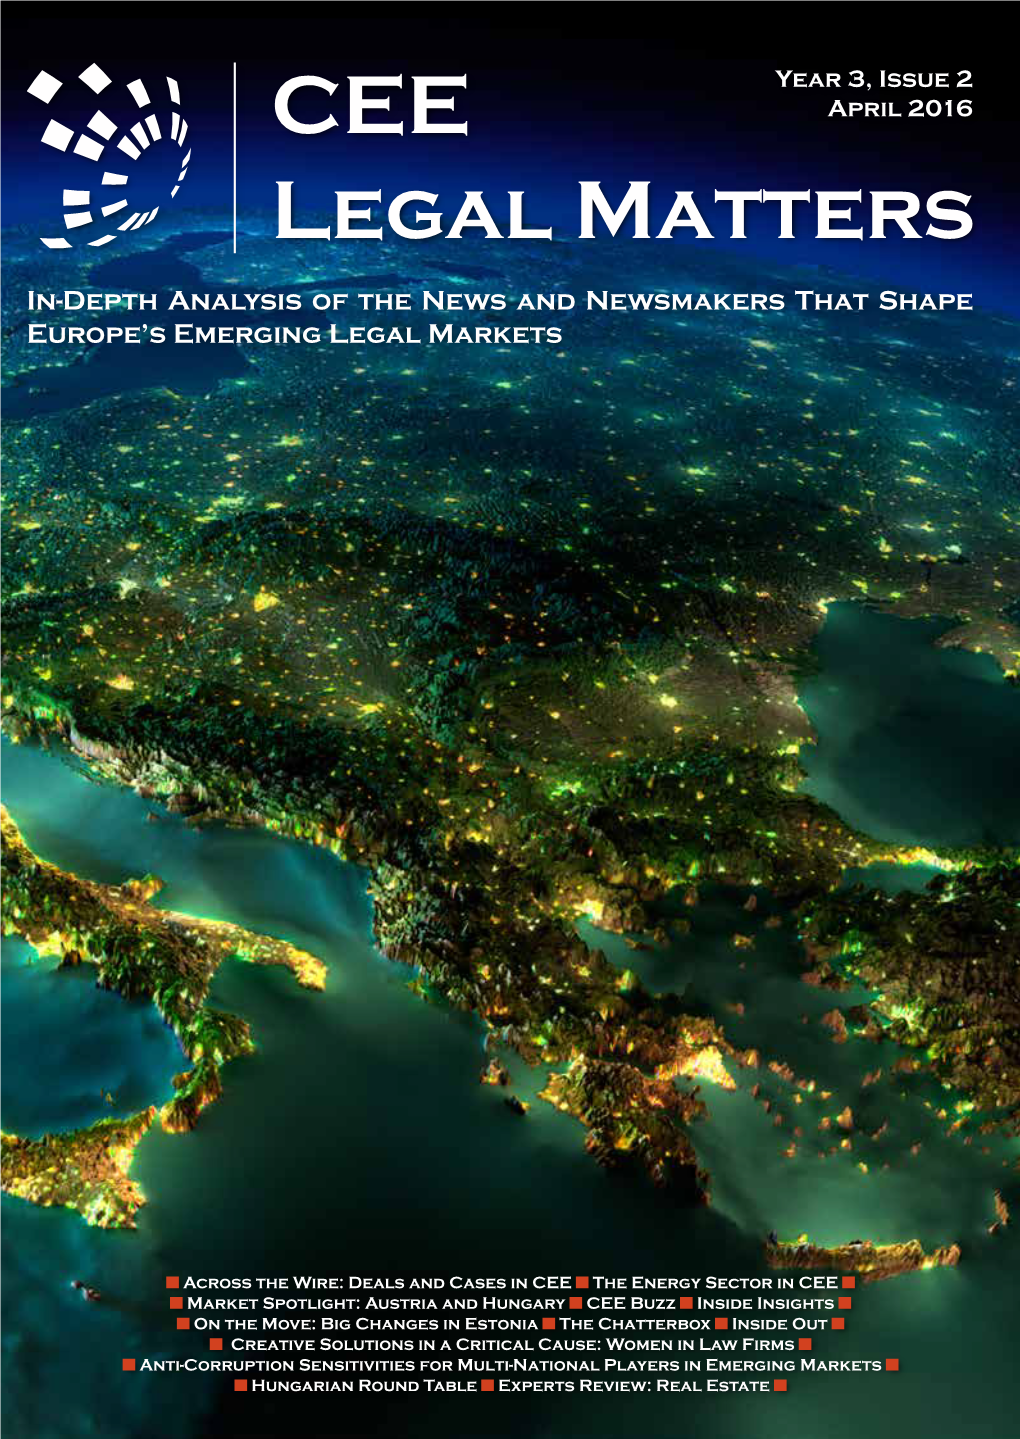 Issue 3.2 of the CEE Legal Matters Magazine